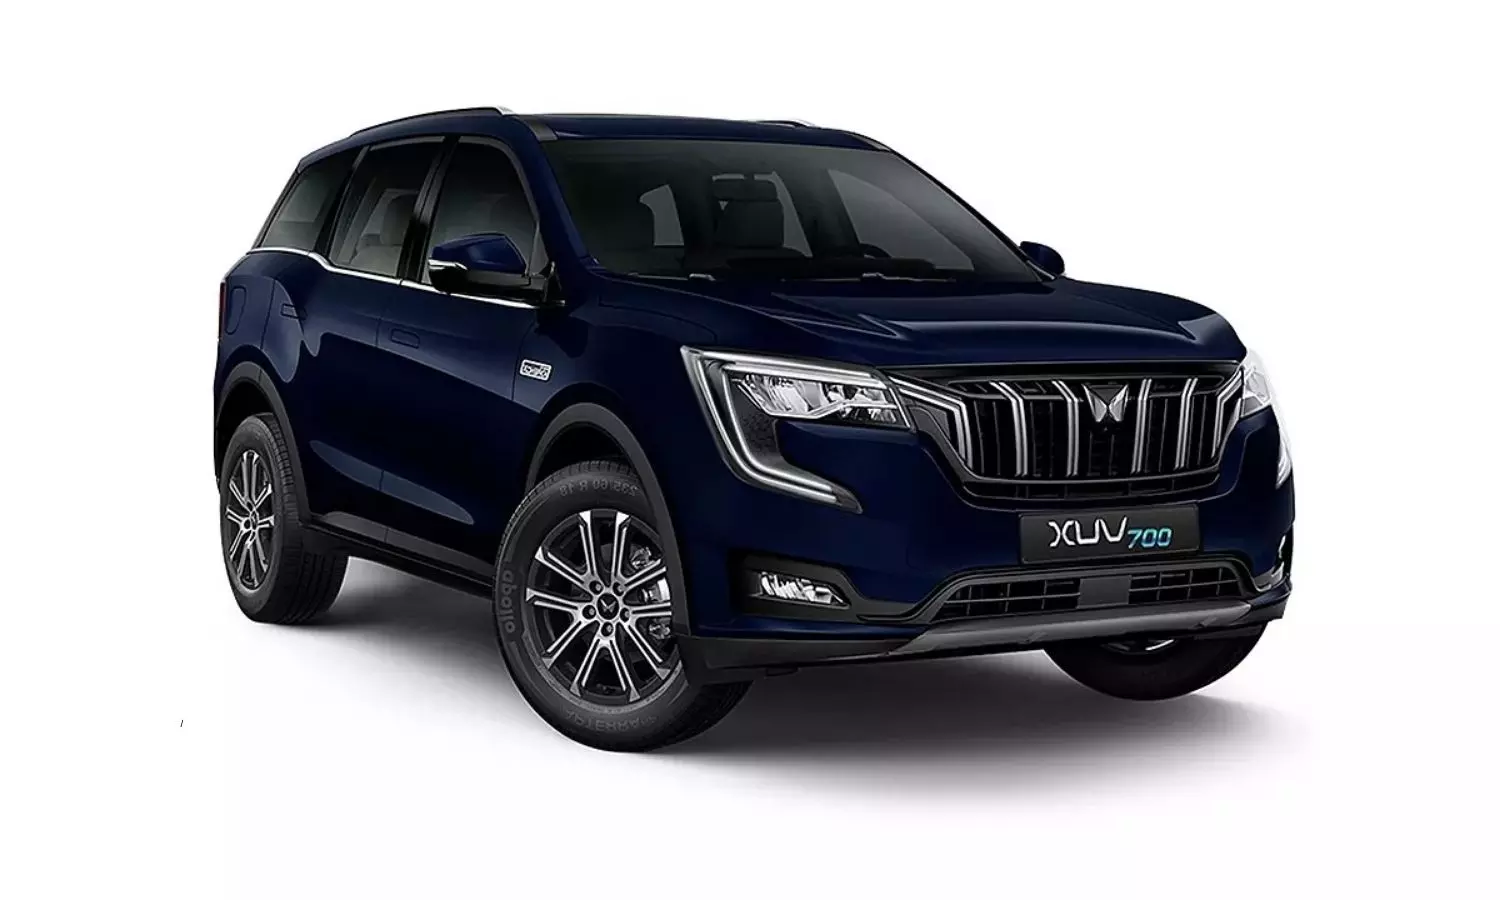 Mahindra xuv700 mx 7 seater launched in India at rs 15 lakh